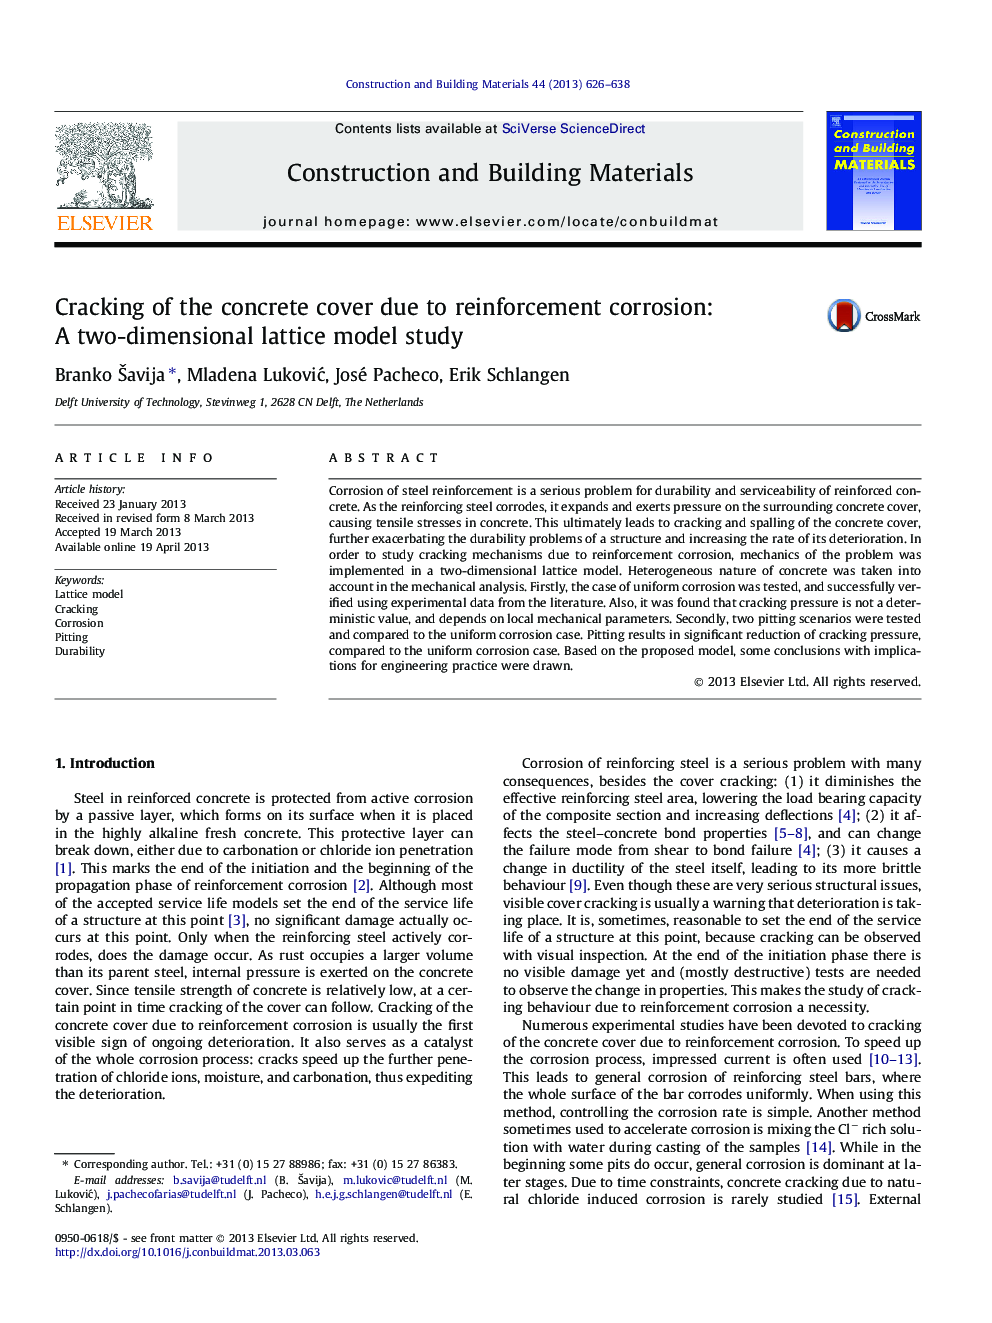 Cracking of the concrete cover due to reinforcement corrosion: A two-dimensional lattice model study